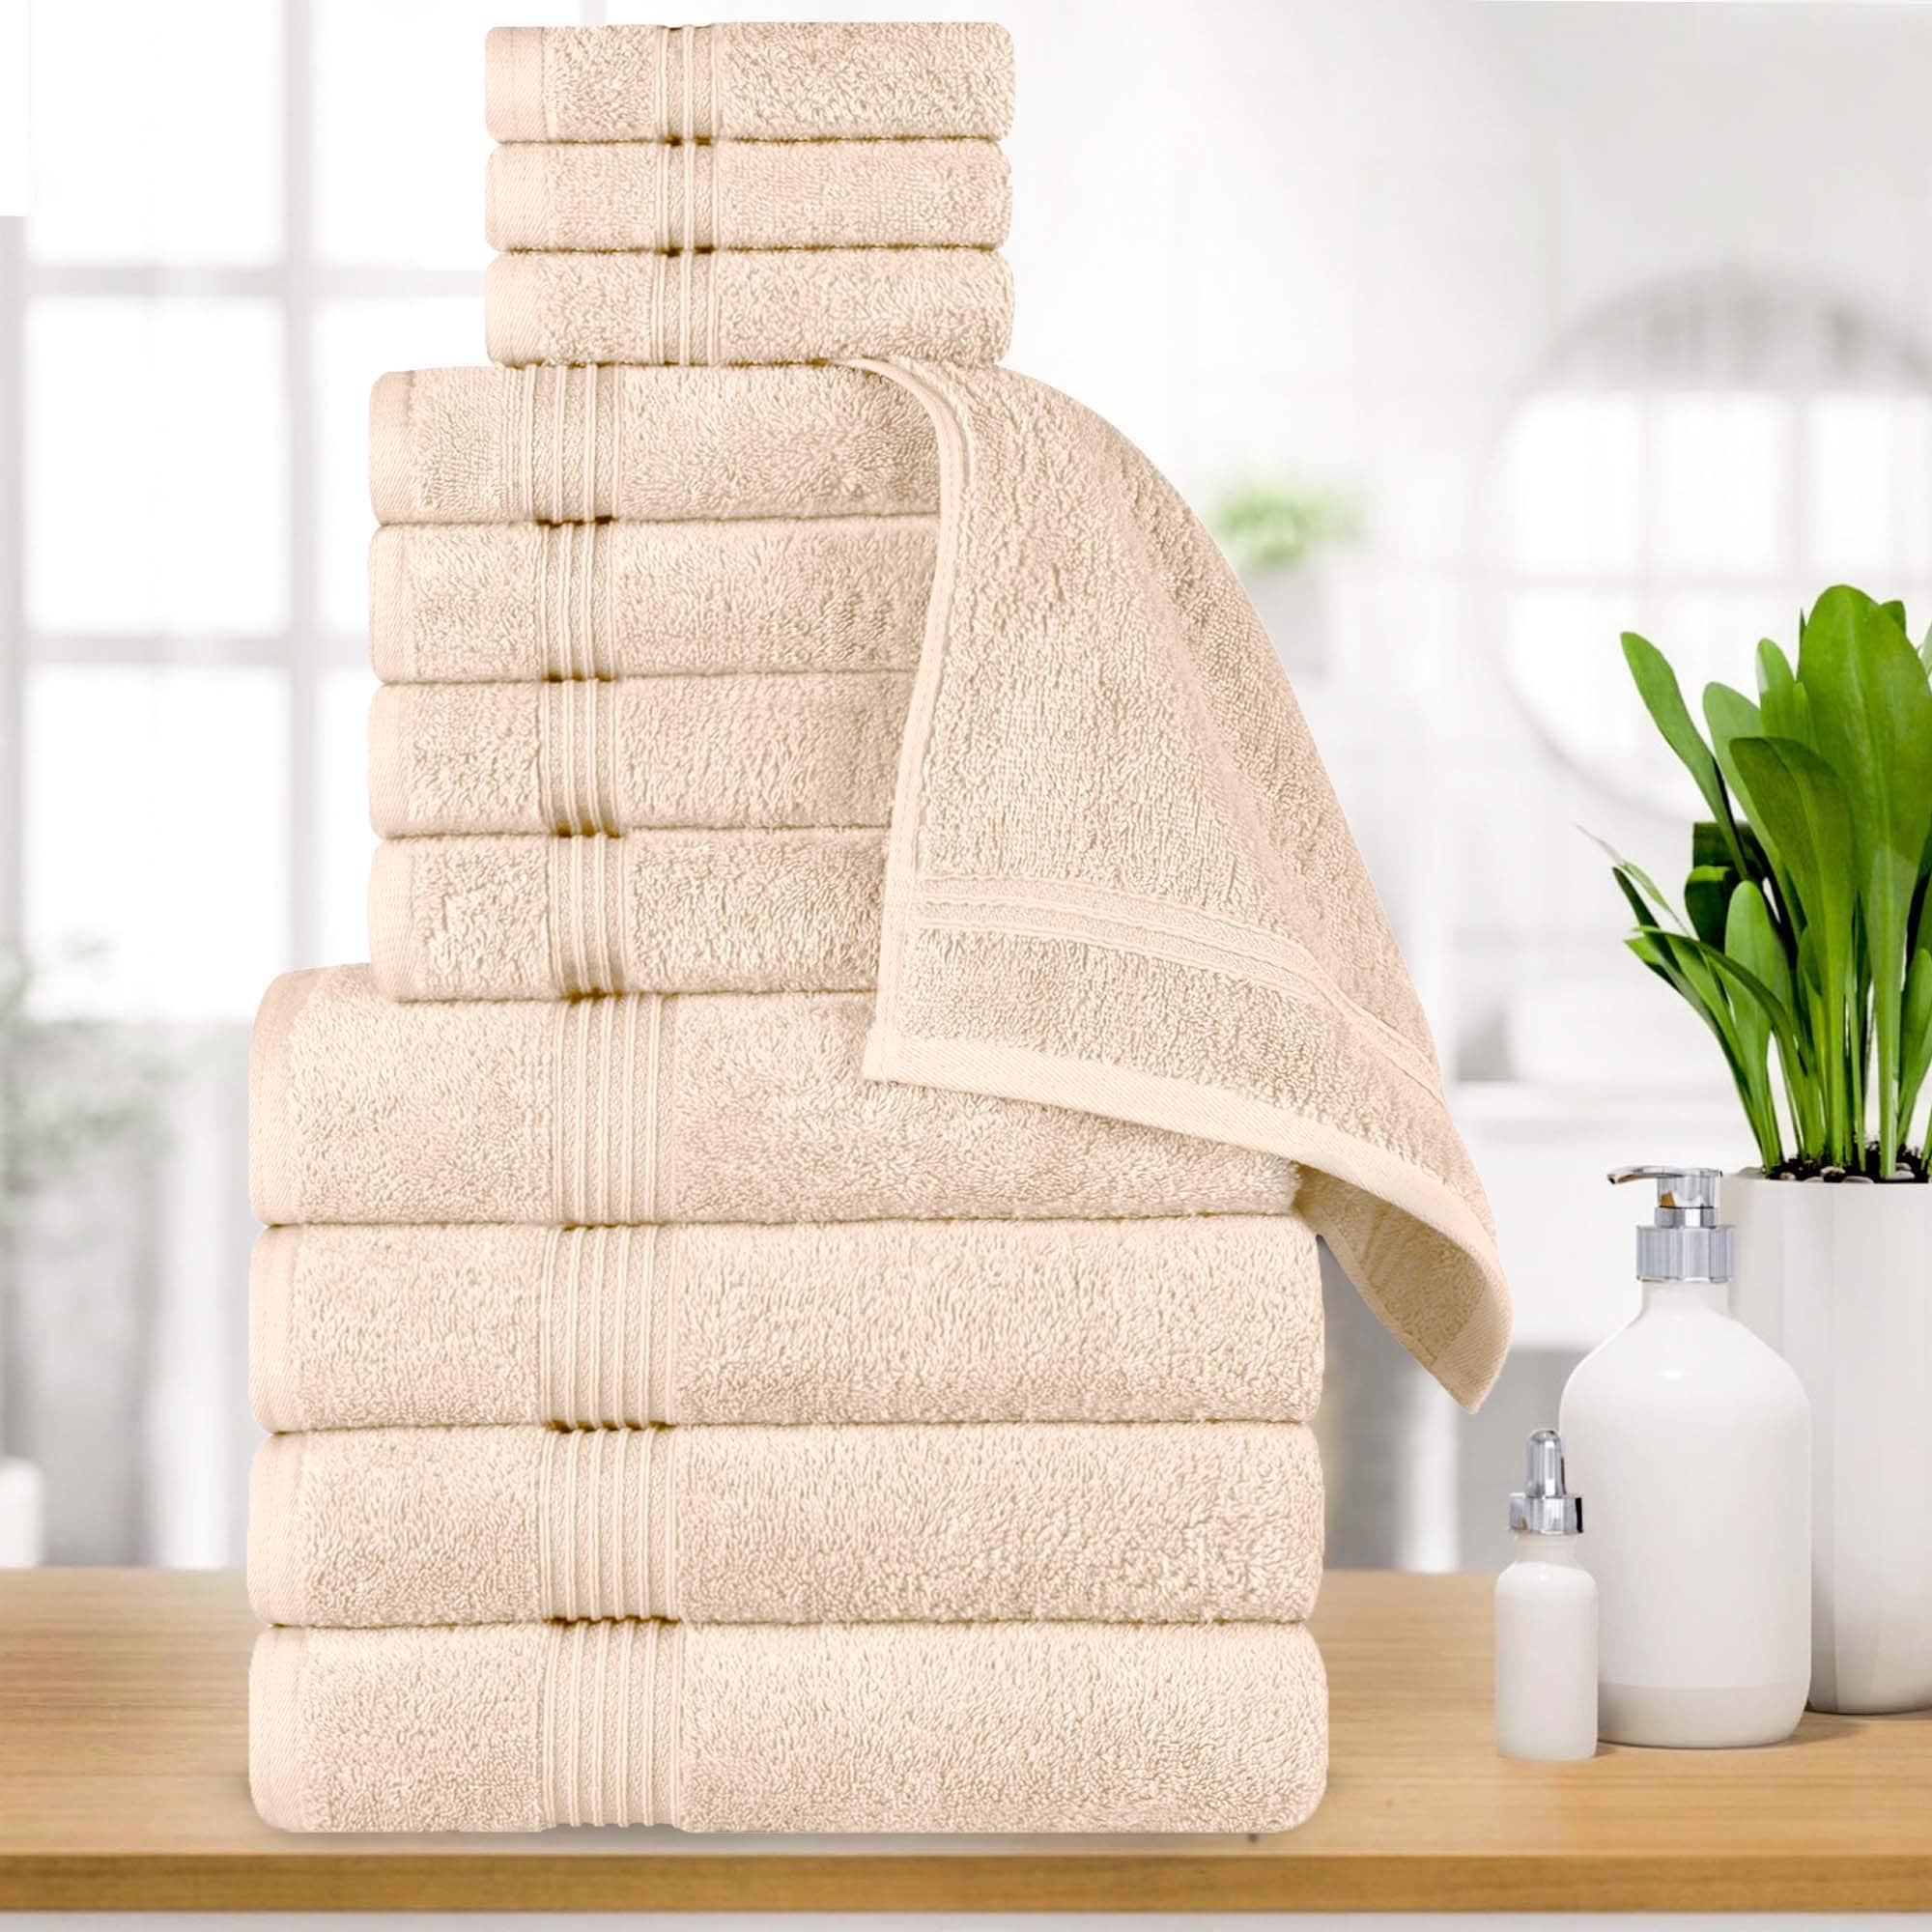 https://ak1.ostkcdn.com/images/products/is/images/direct/ef07d86ee5eb022cc75dab71785cb33a55bd41b7/Superior-Heritage-Egyptian-Cotton-Heavyweight-12-Piece-Bathroom-Towel-Set.jpg